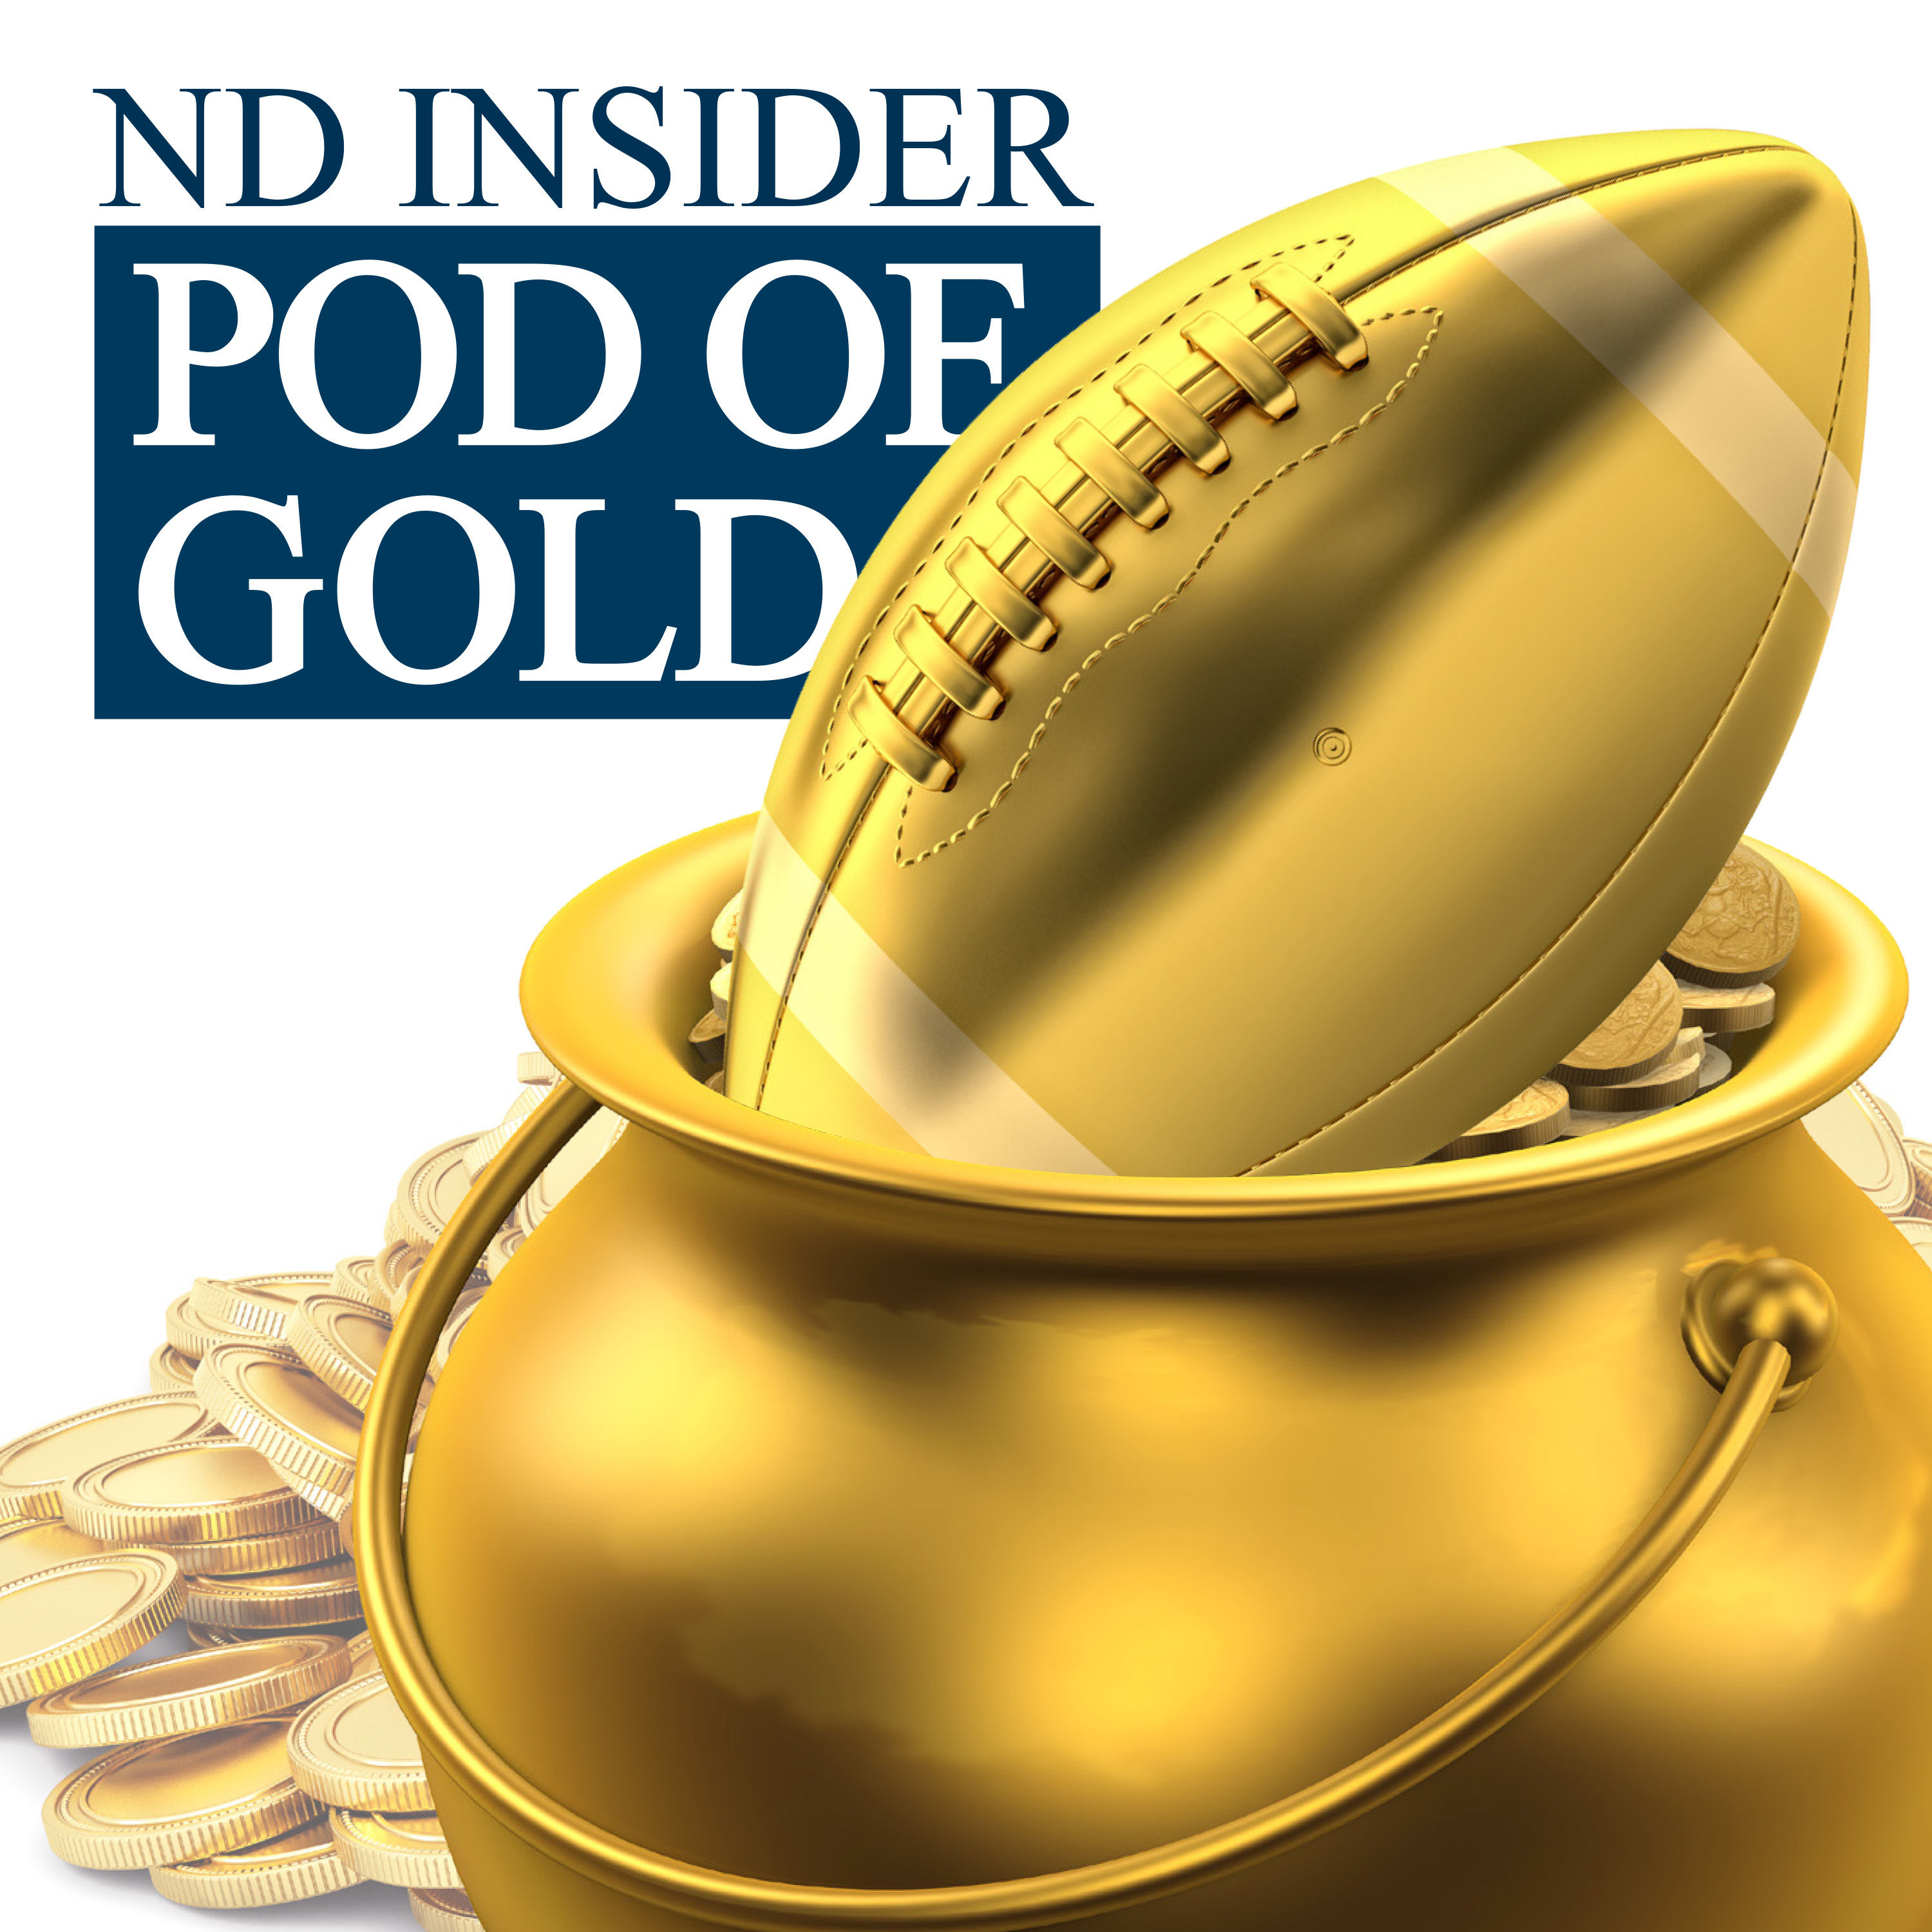 Pod of Gold: Unpacking Notre Dame's deflating finish against Ohio State